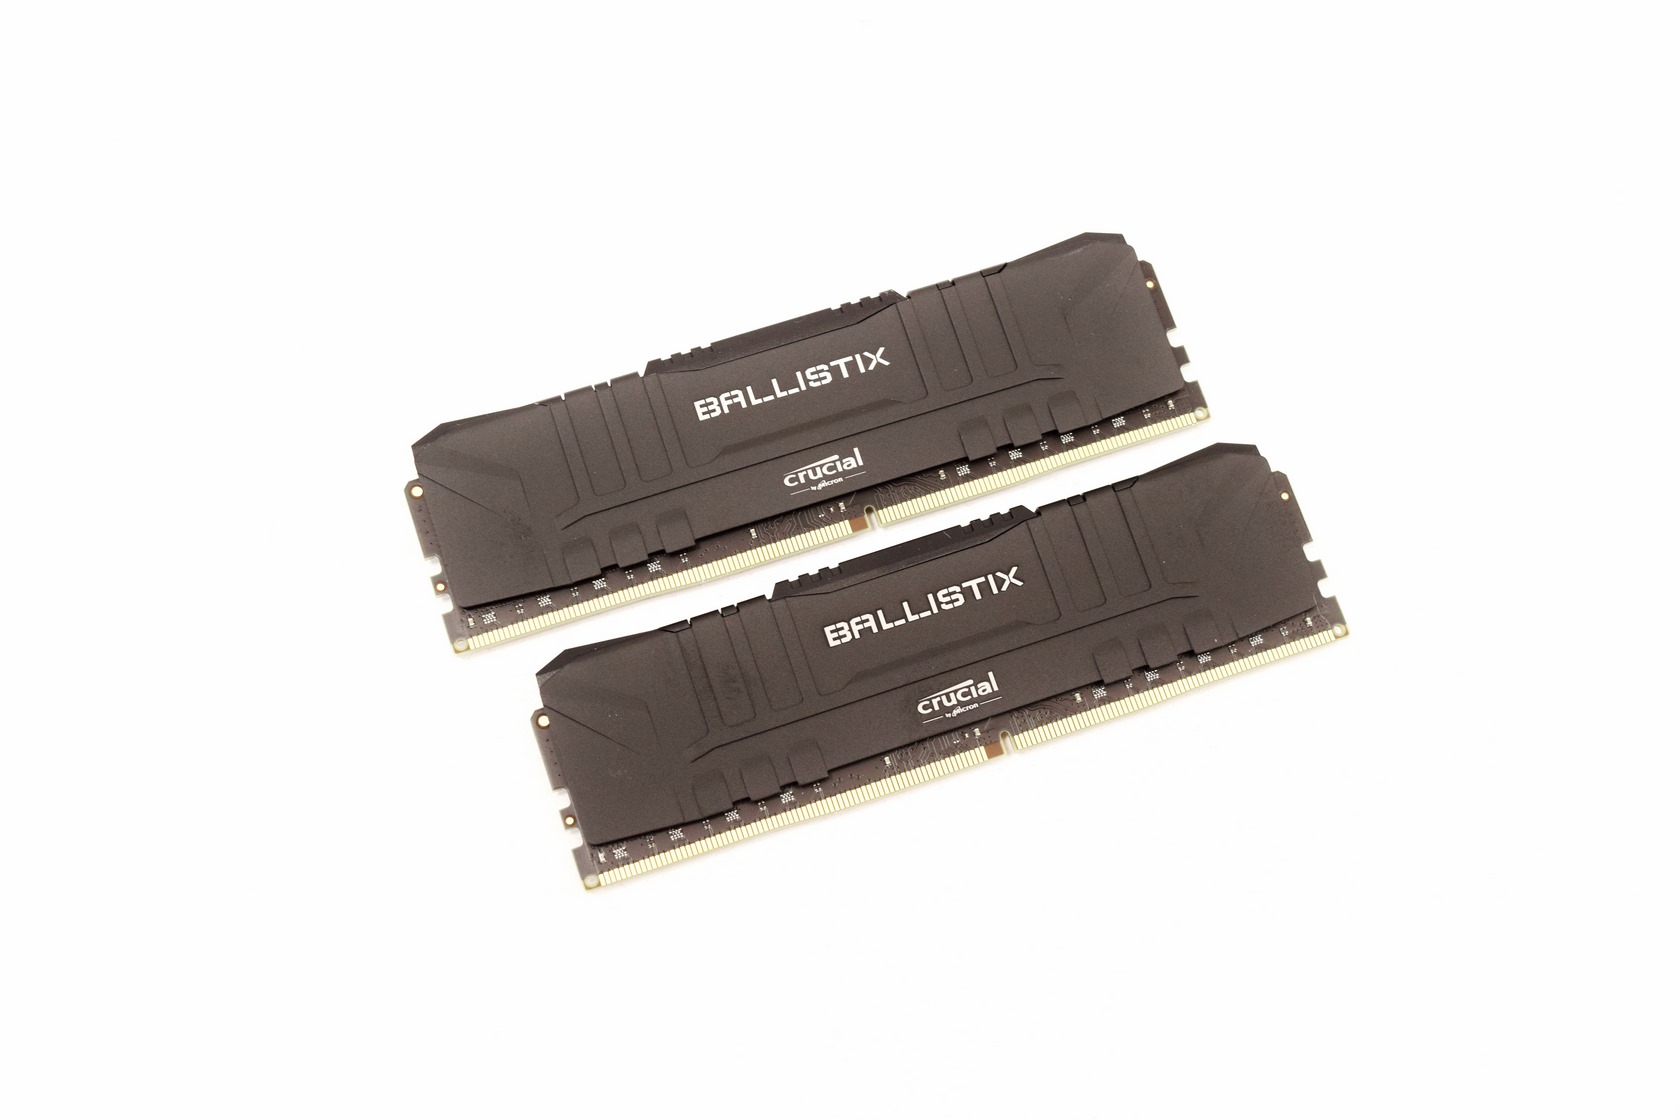 Crucial Ballistix Gaming 64GB DDR4 3200MHZ CL16 Dual-Channel Kit Review